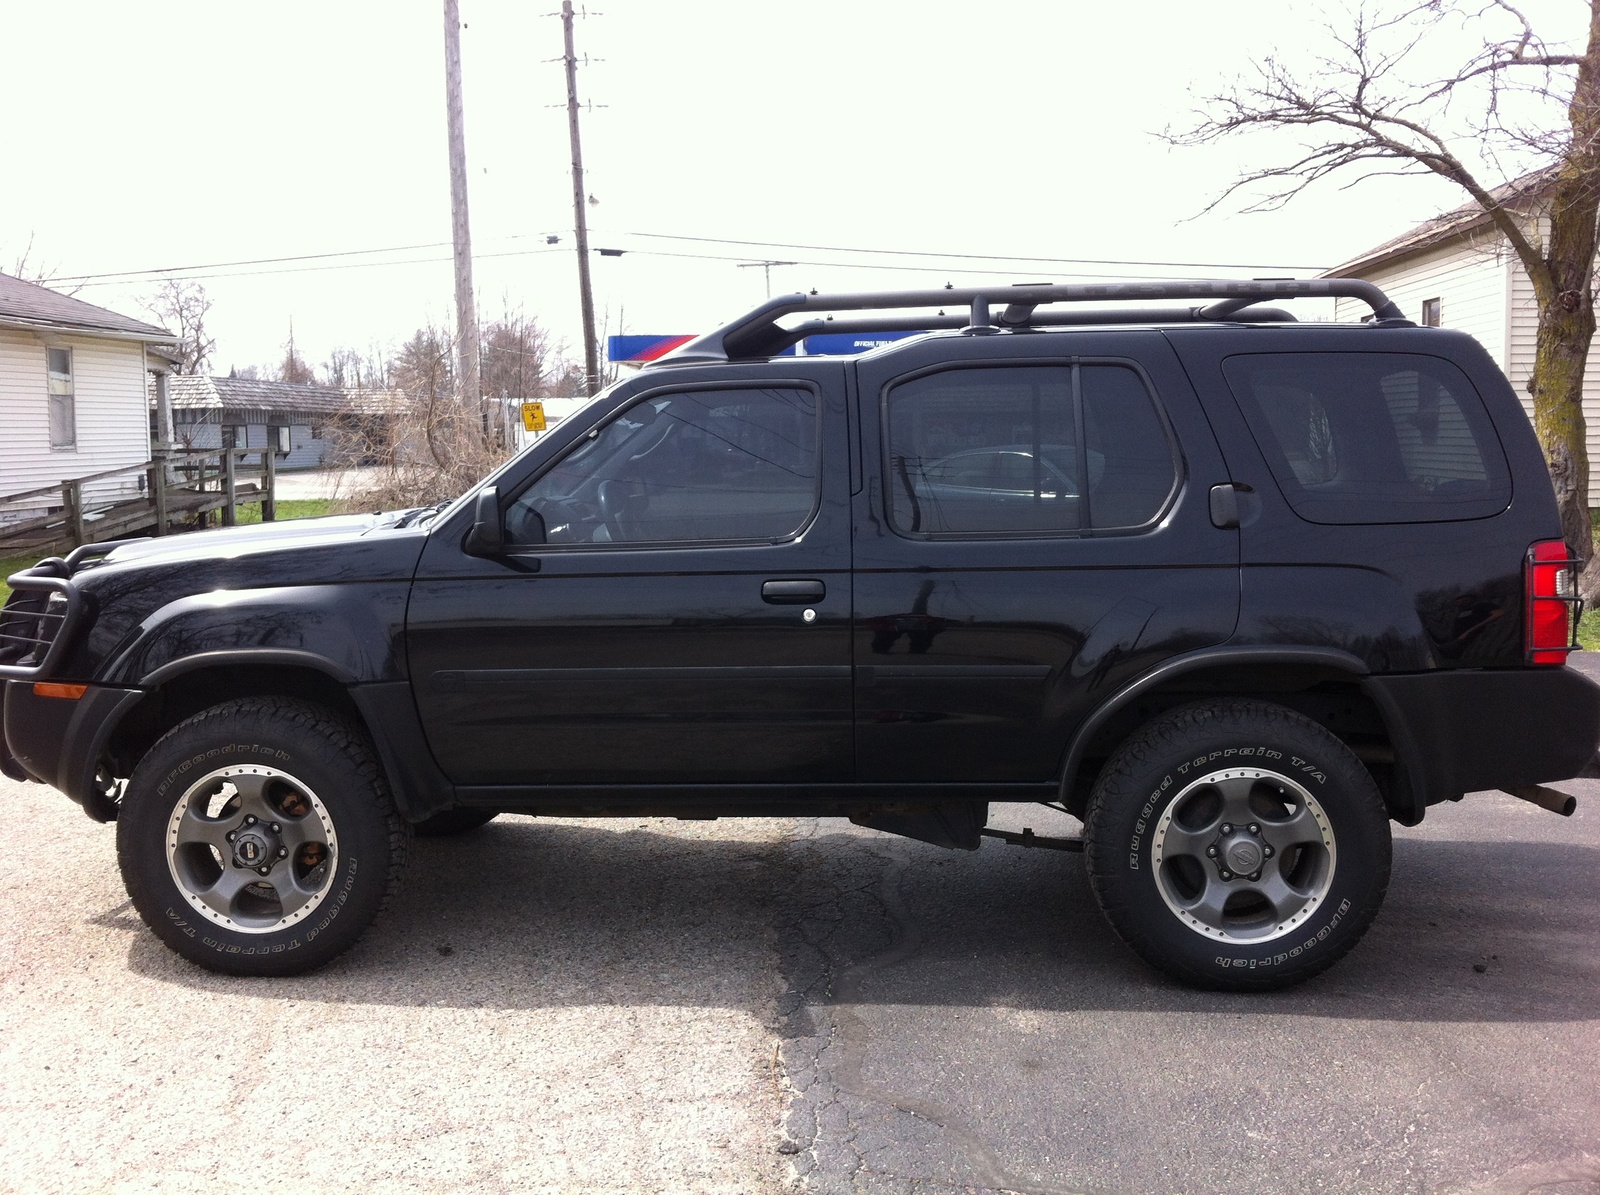 What is the towing capacity of a 2002 nissan xterra